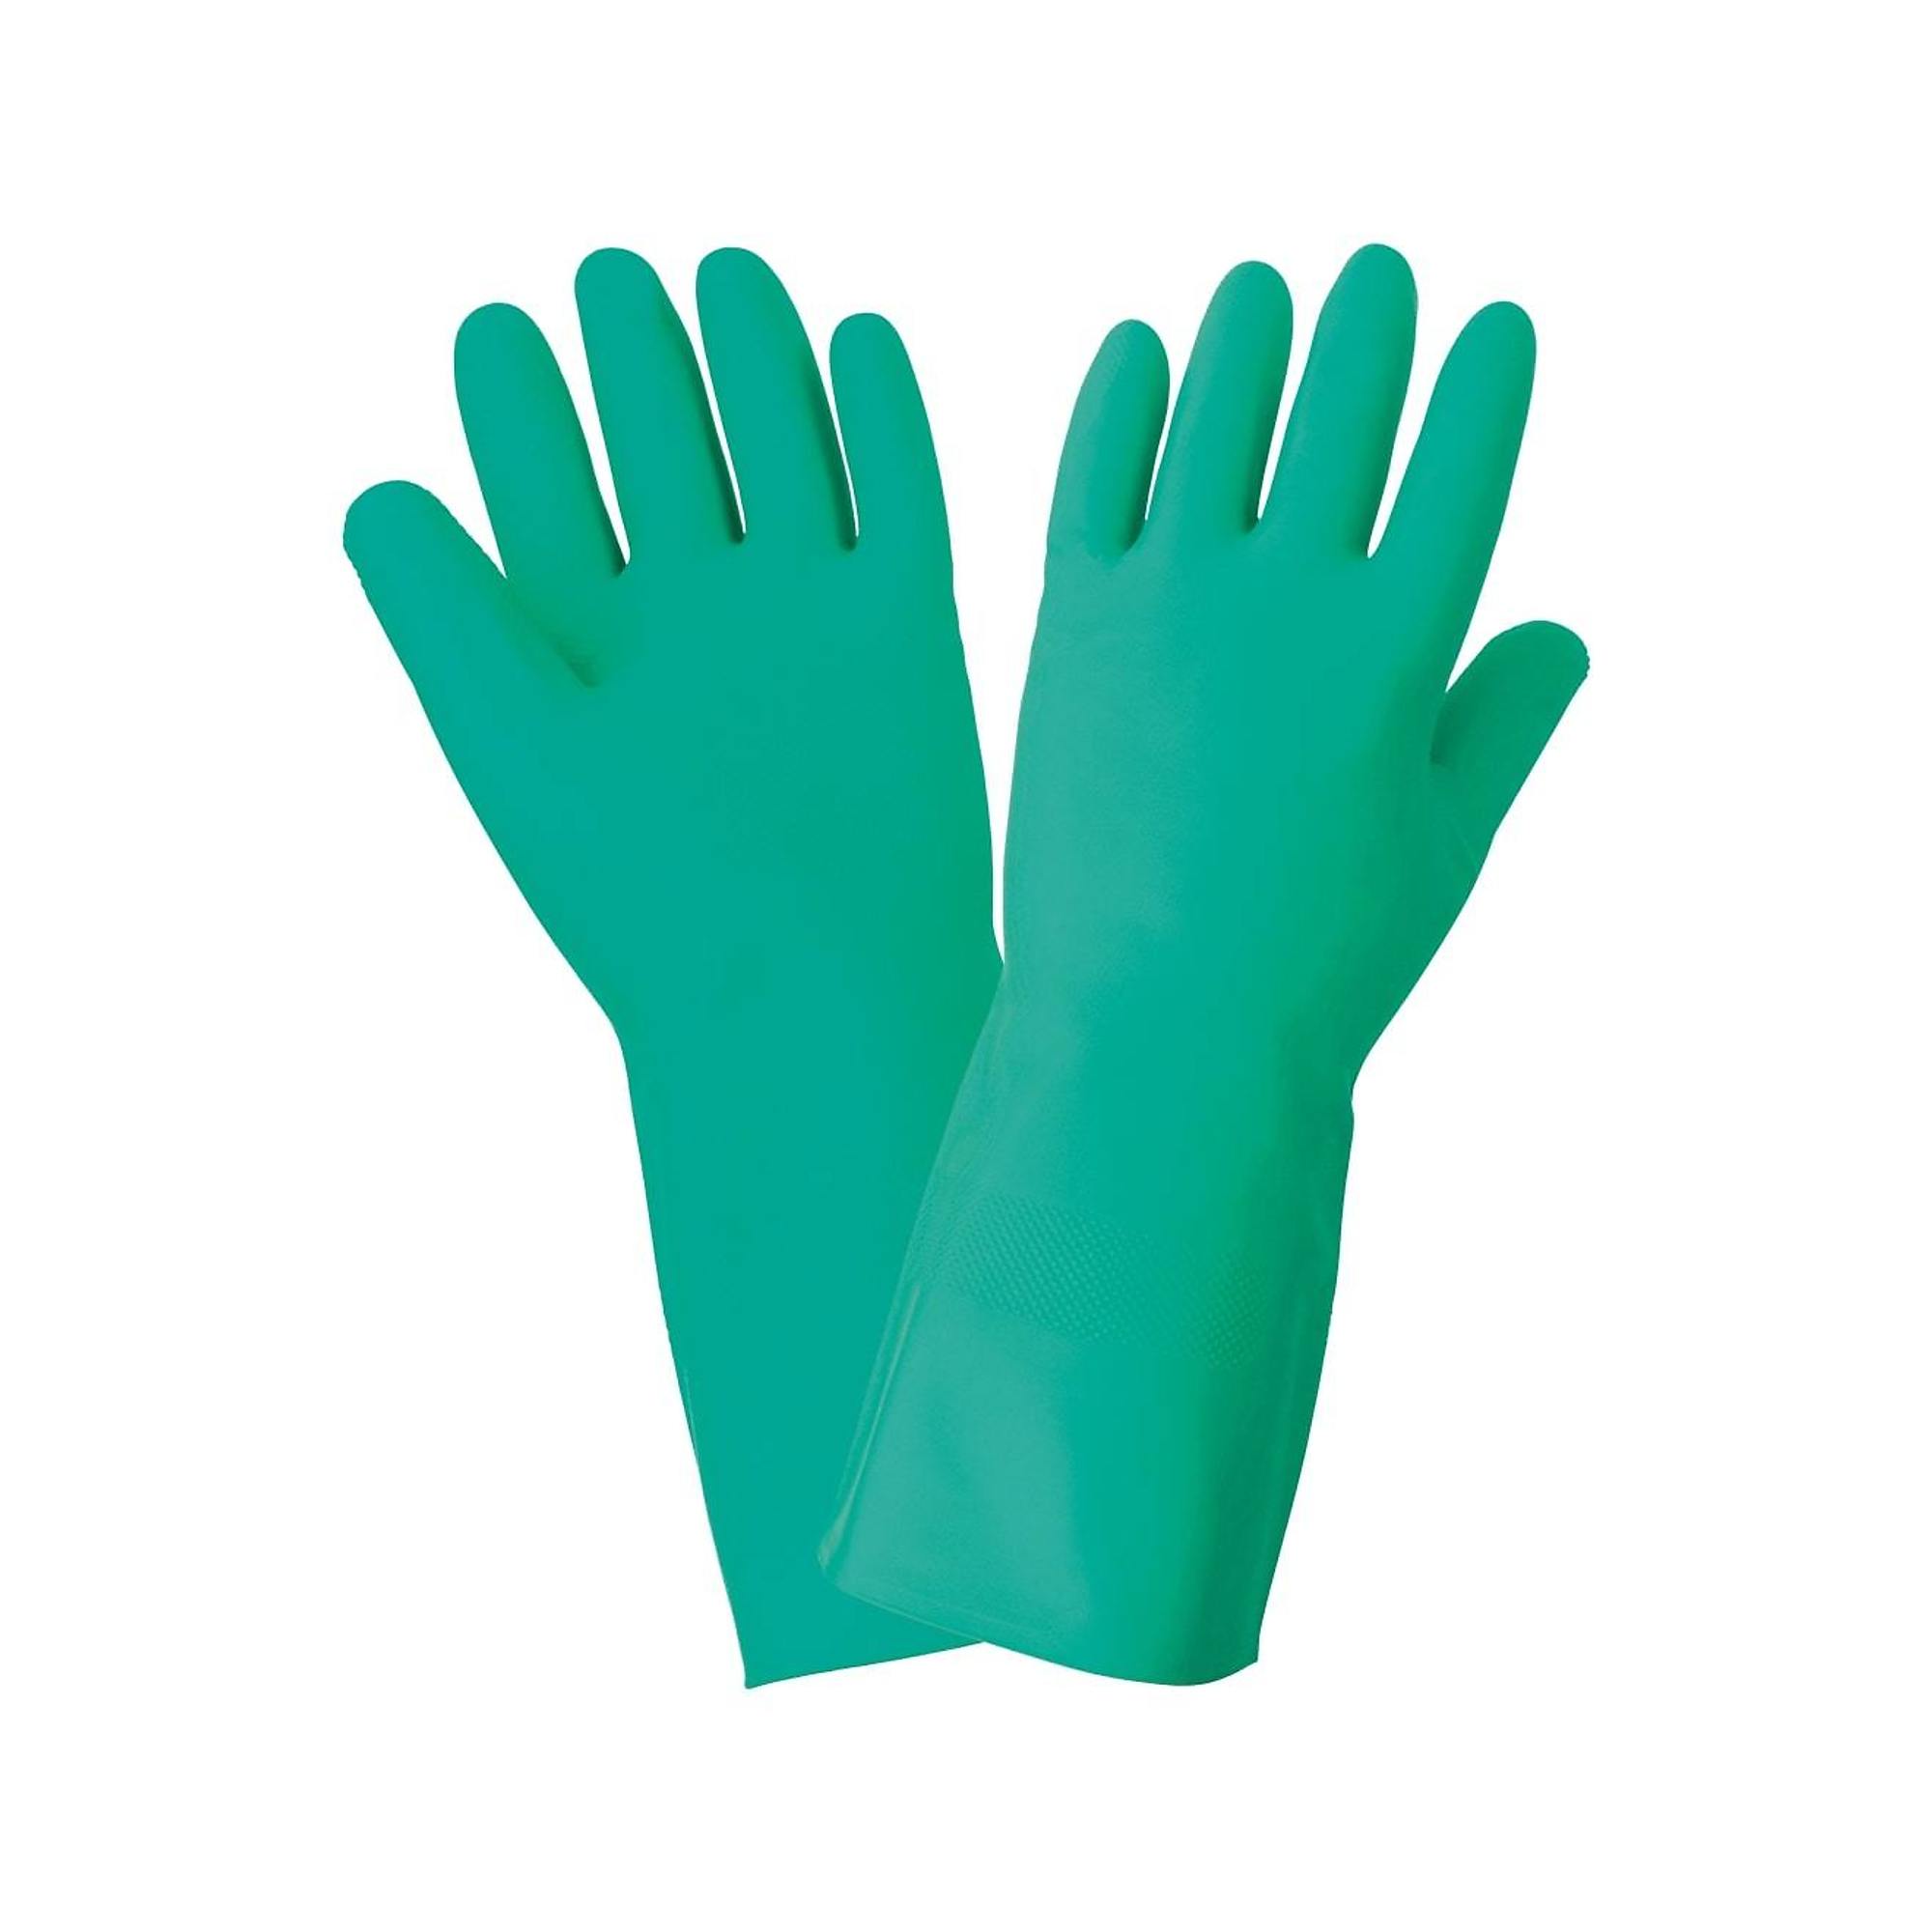 FrogWear, 12-Mil, 13Inch, Unlined, Nitrile Diamond Grip Gloves - 12 Pairs, Size L, Color Green, Included (qty.) 12 Model 515-9(L)